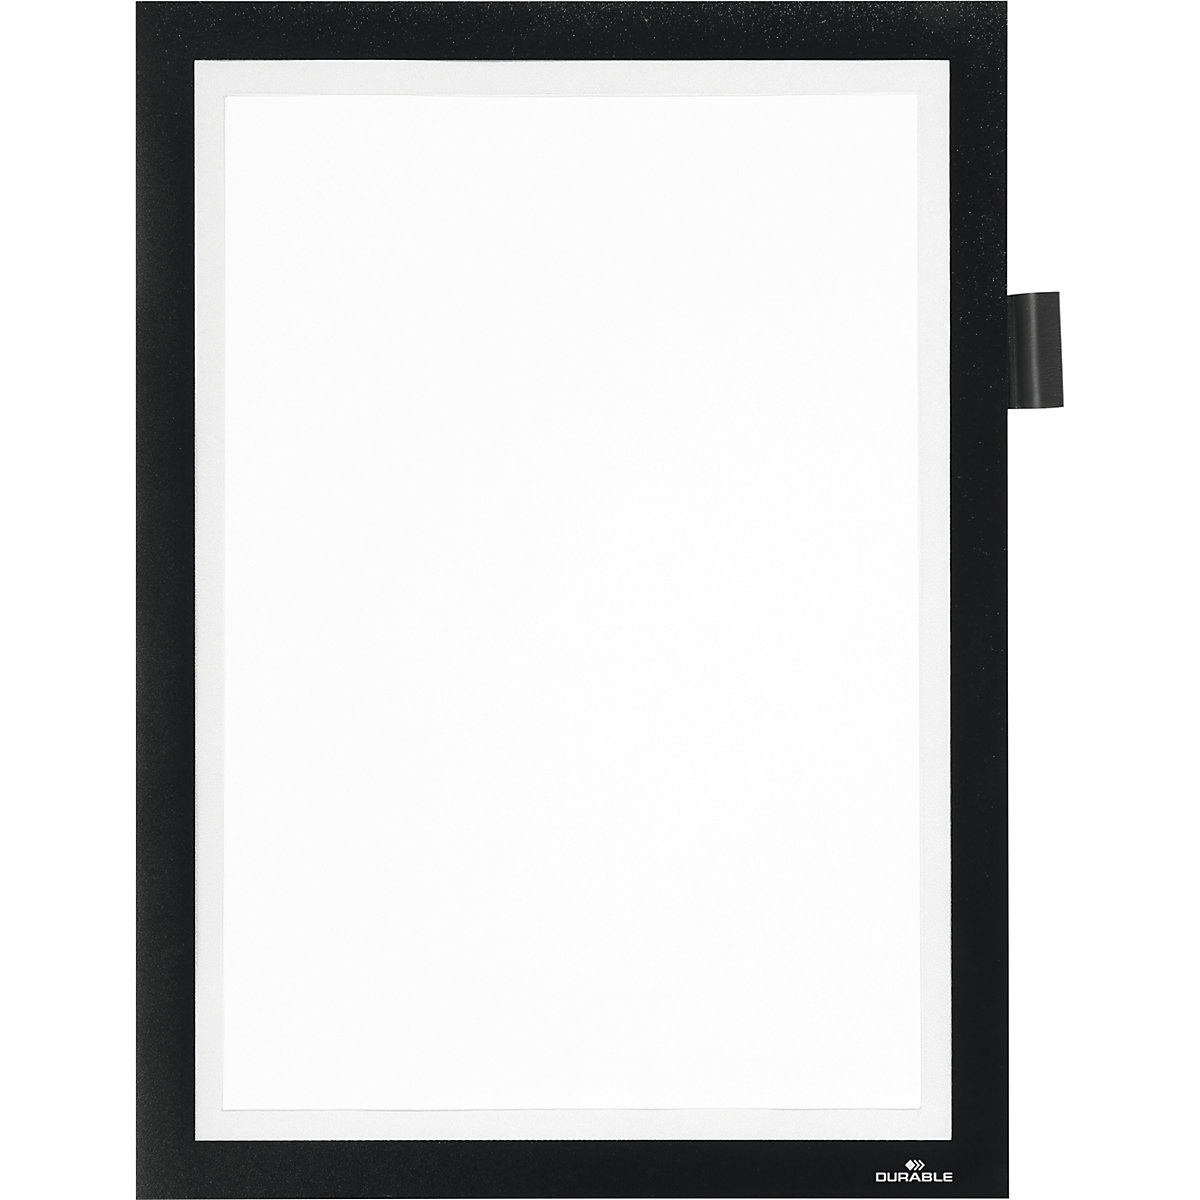 DURAFRAME® MAGNETIC NOTE A4 information frame – DURABLE